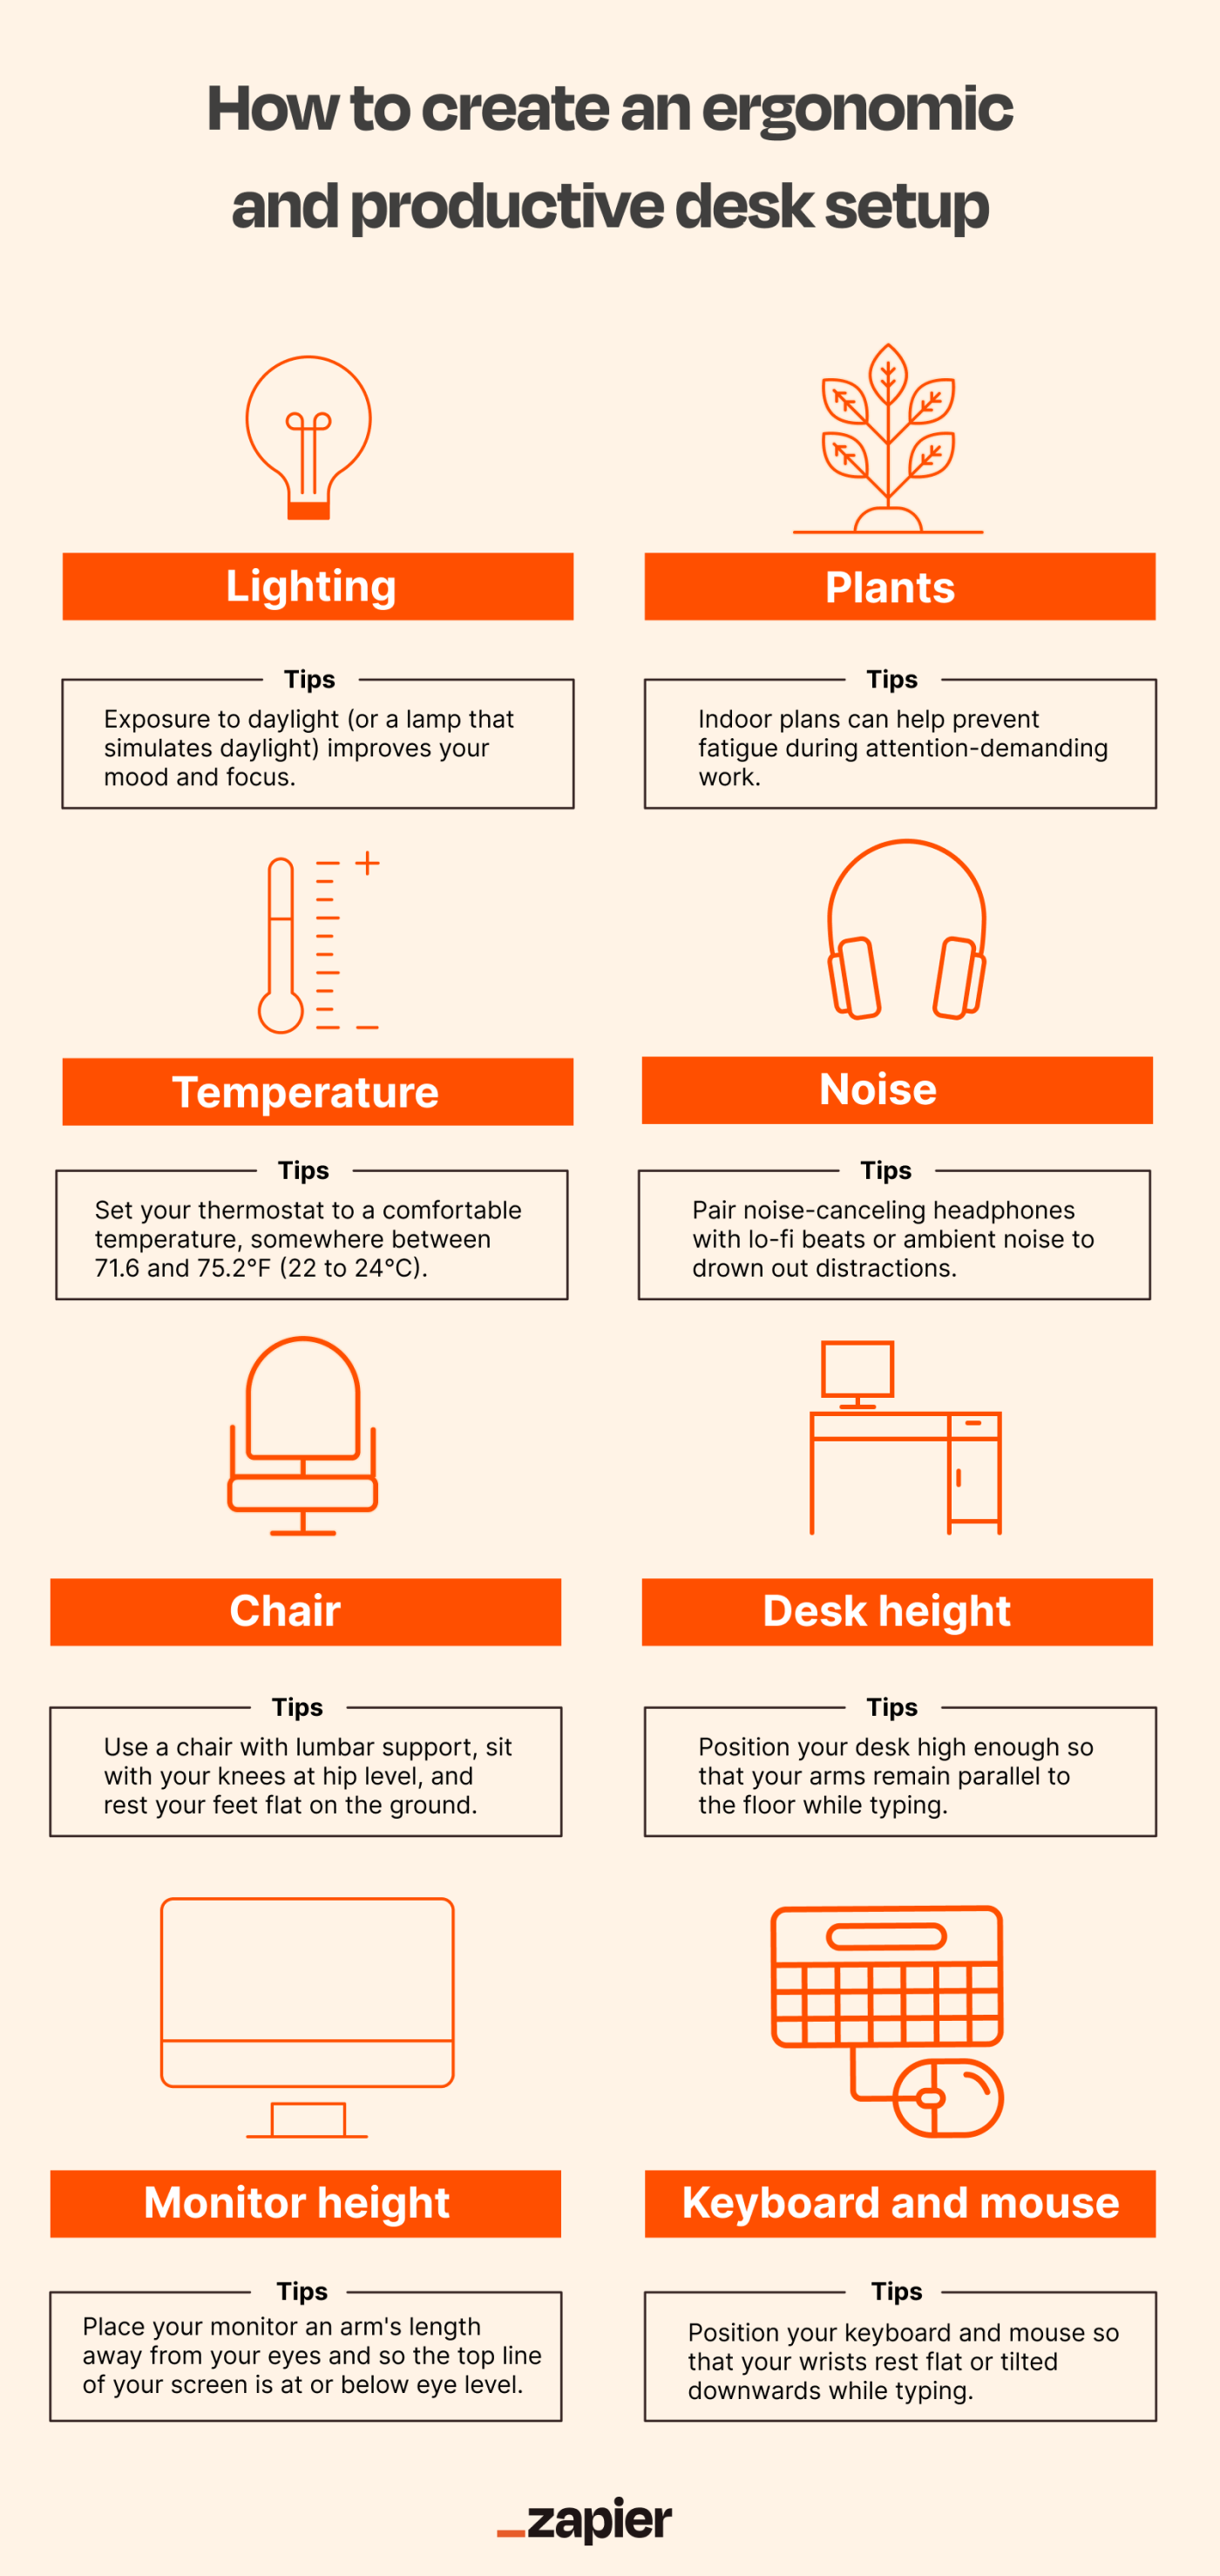 An infographic with tips for how to create an ergonomic desk setup and productive workstation.